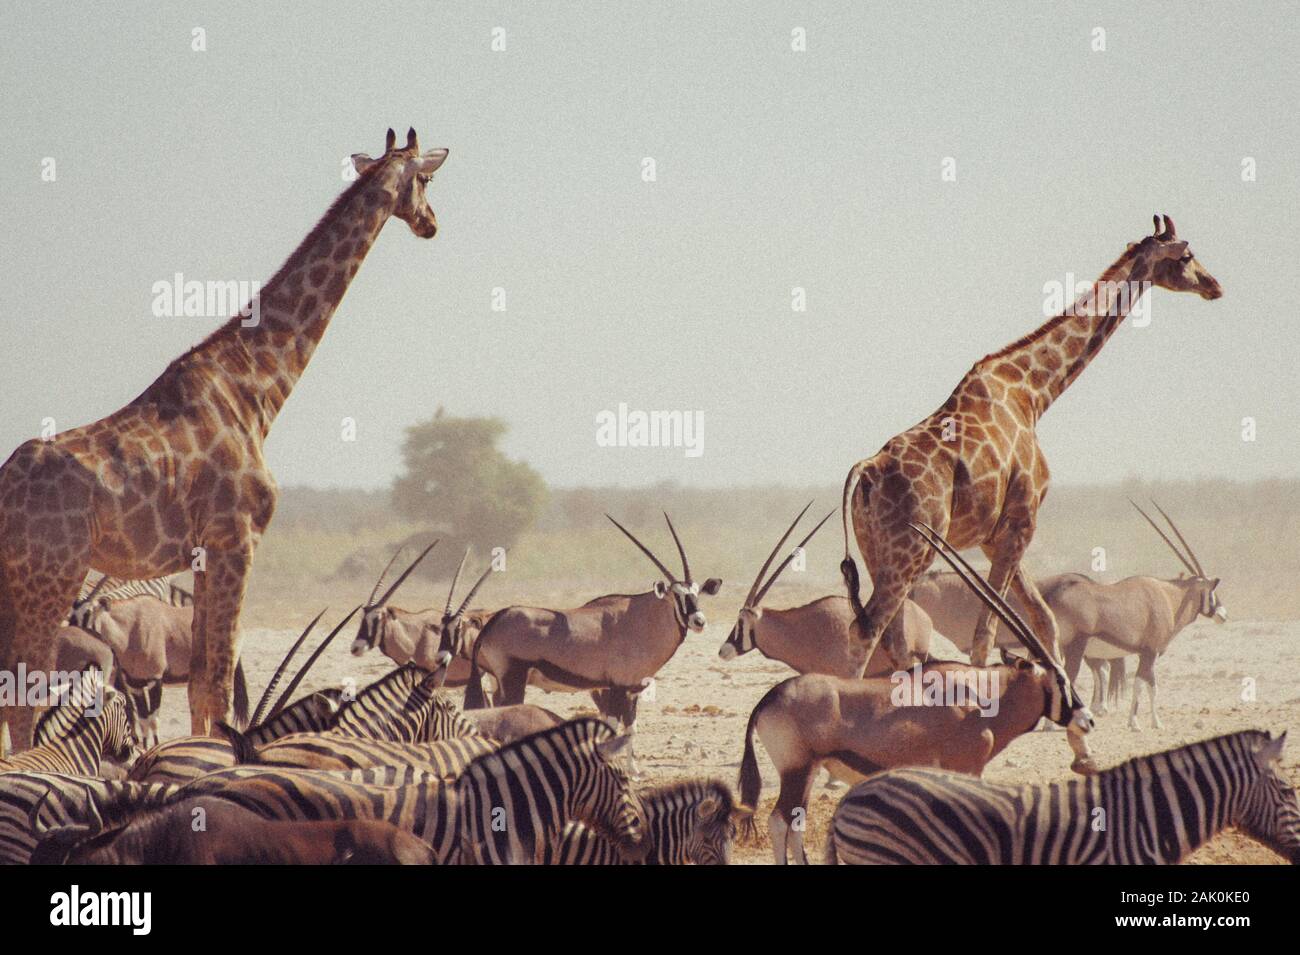 giraffes walking in front of oryx and zebras in Namibia (Africa) Stock Photo